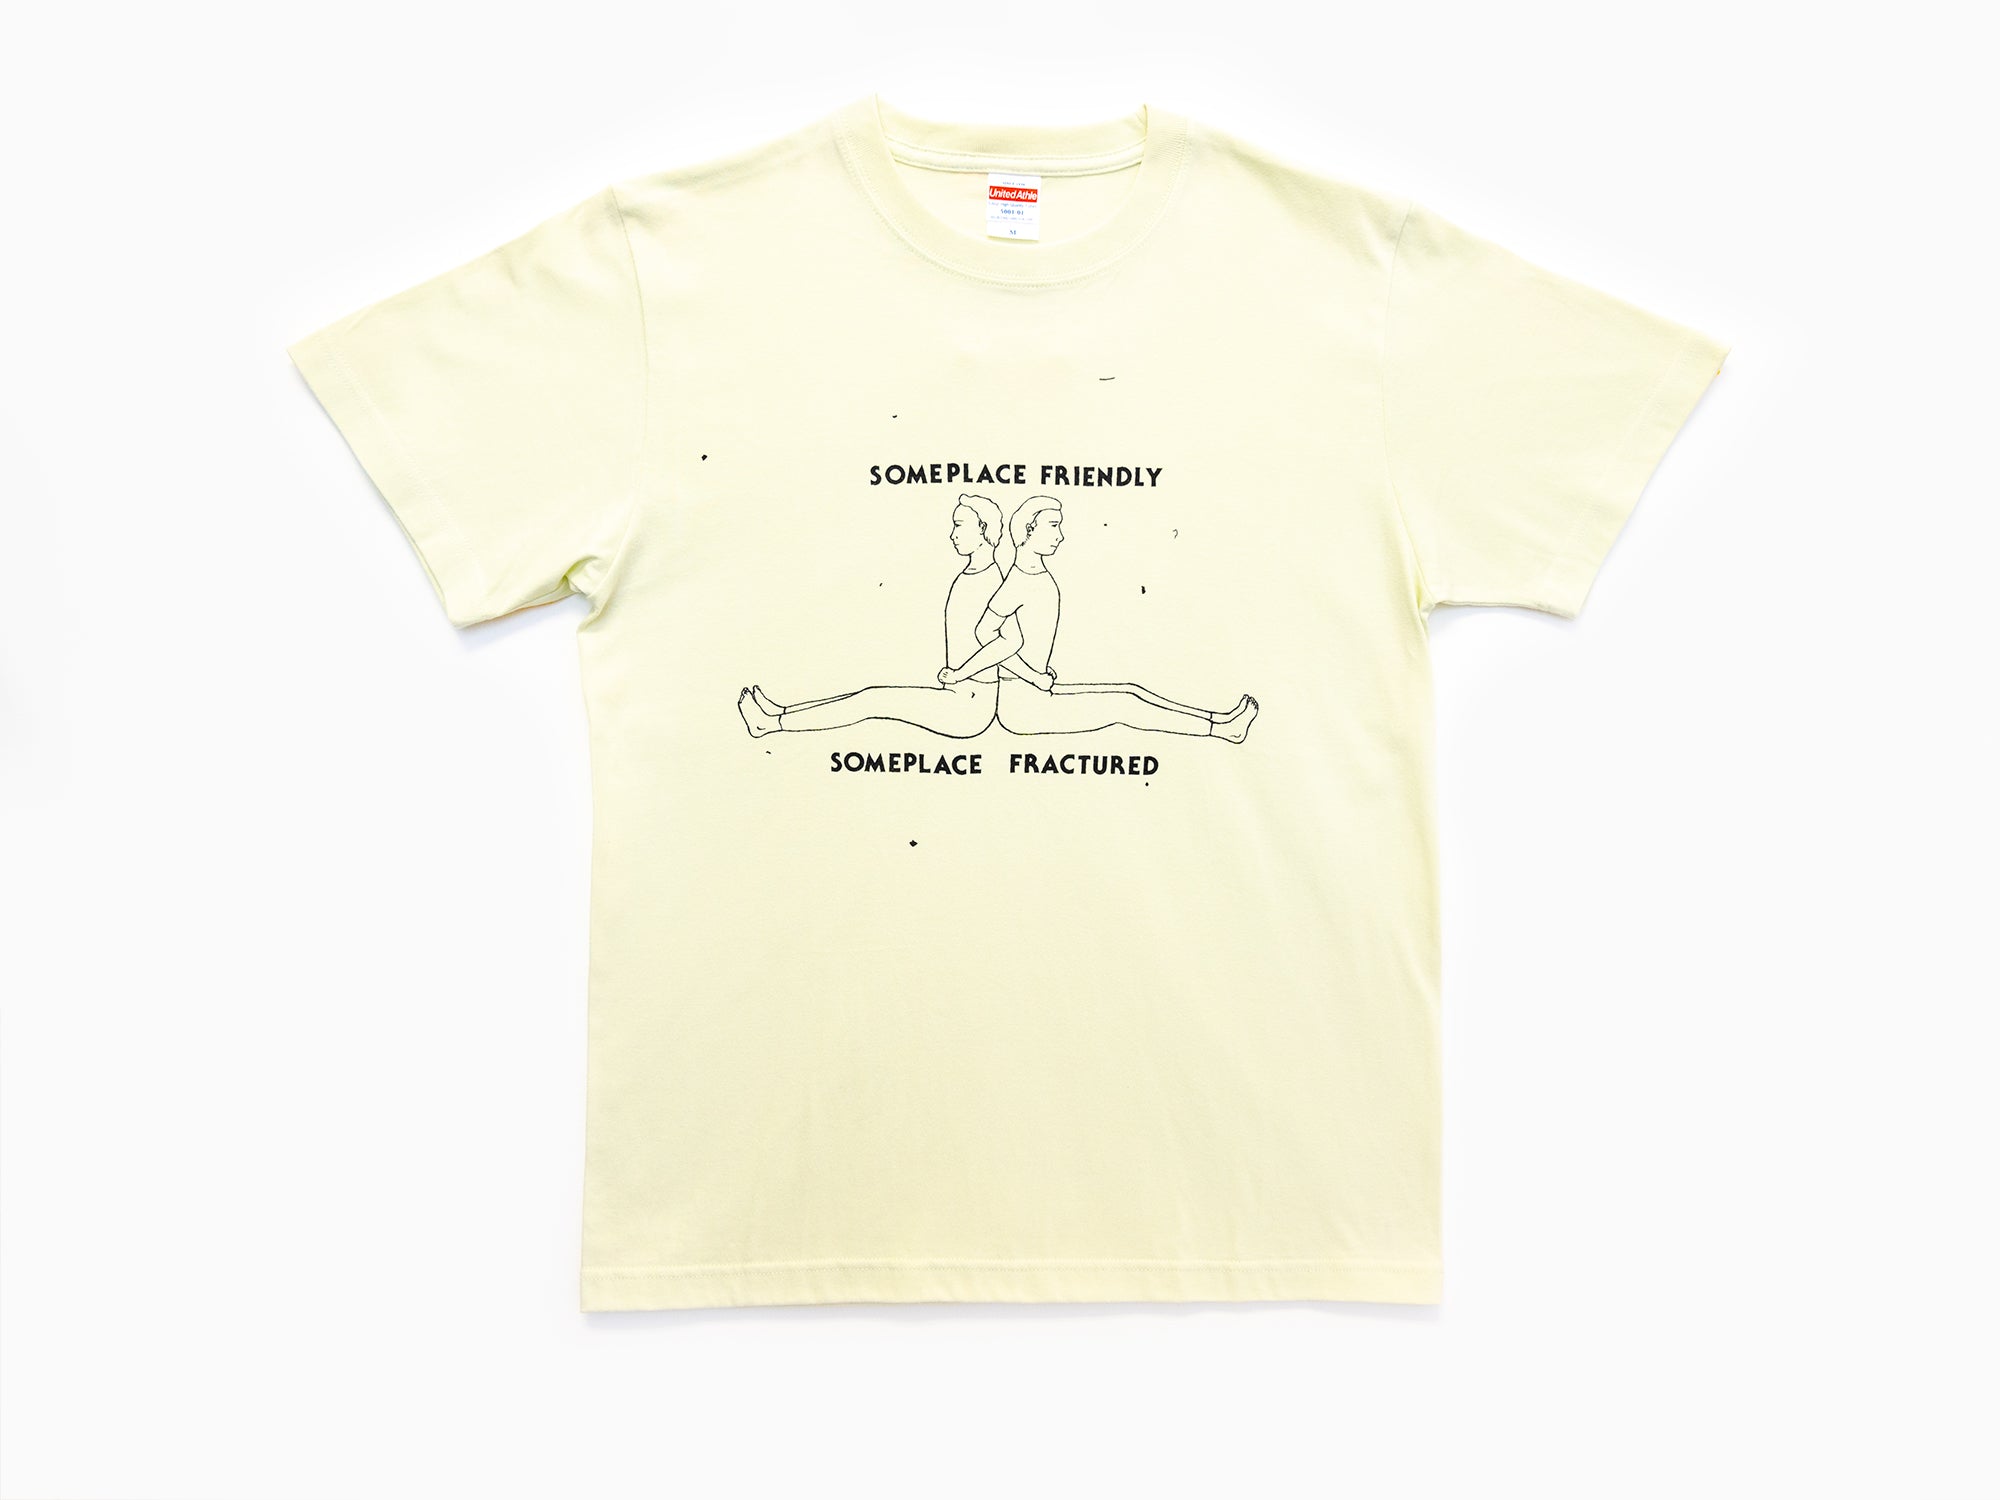 Barry McGee - Someplace Friendly, Someplace Fractured T-shirt